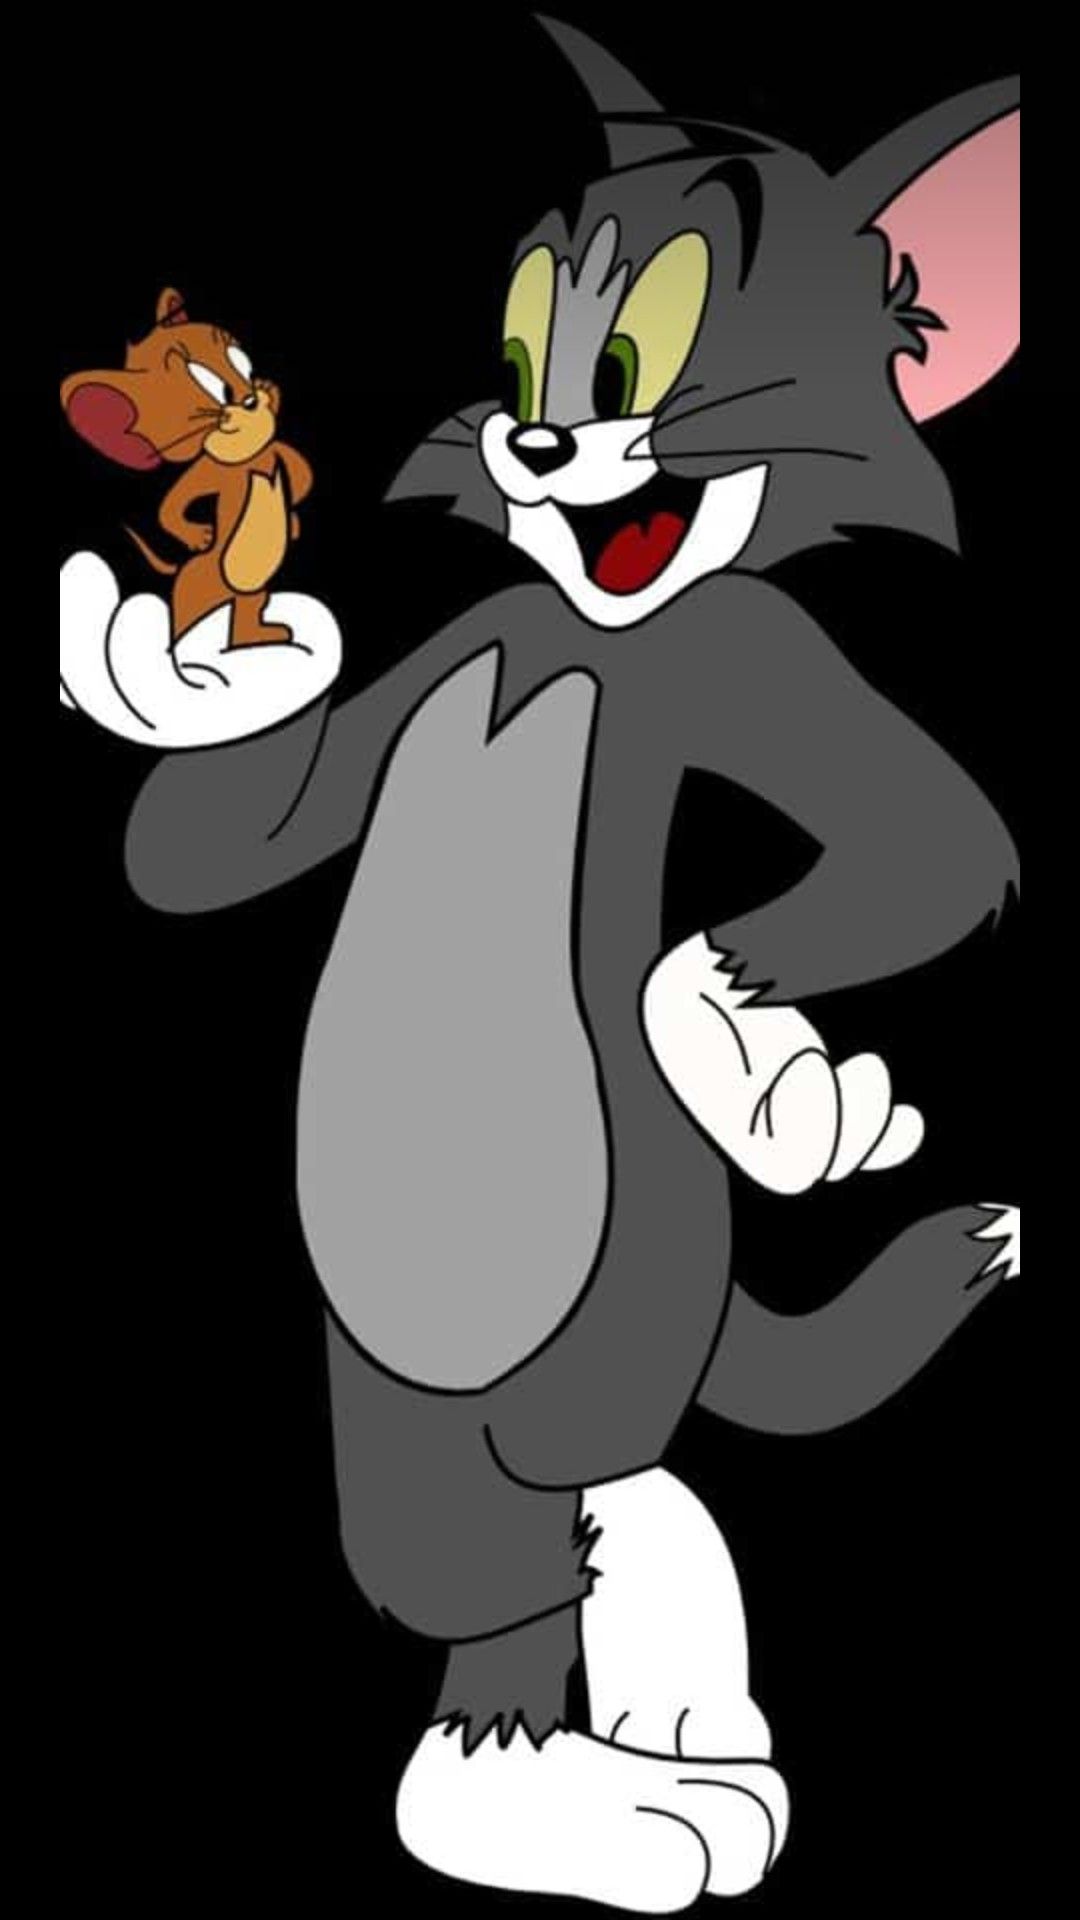 Wallpaper. Tom and jerry wallpaper, Tom and jerry cartoon, Tom and jerry picture